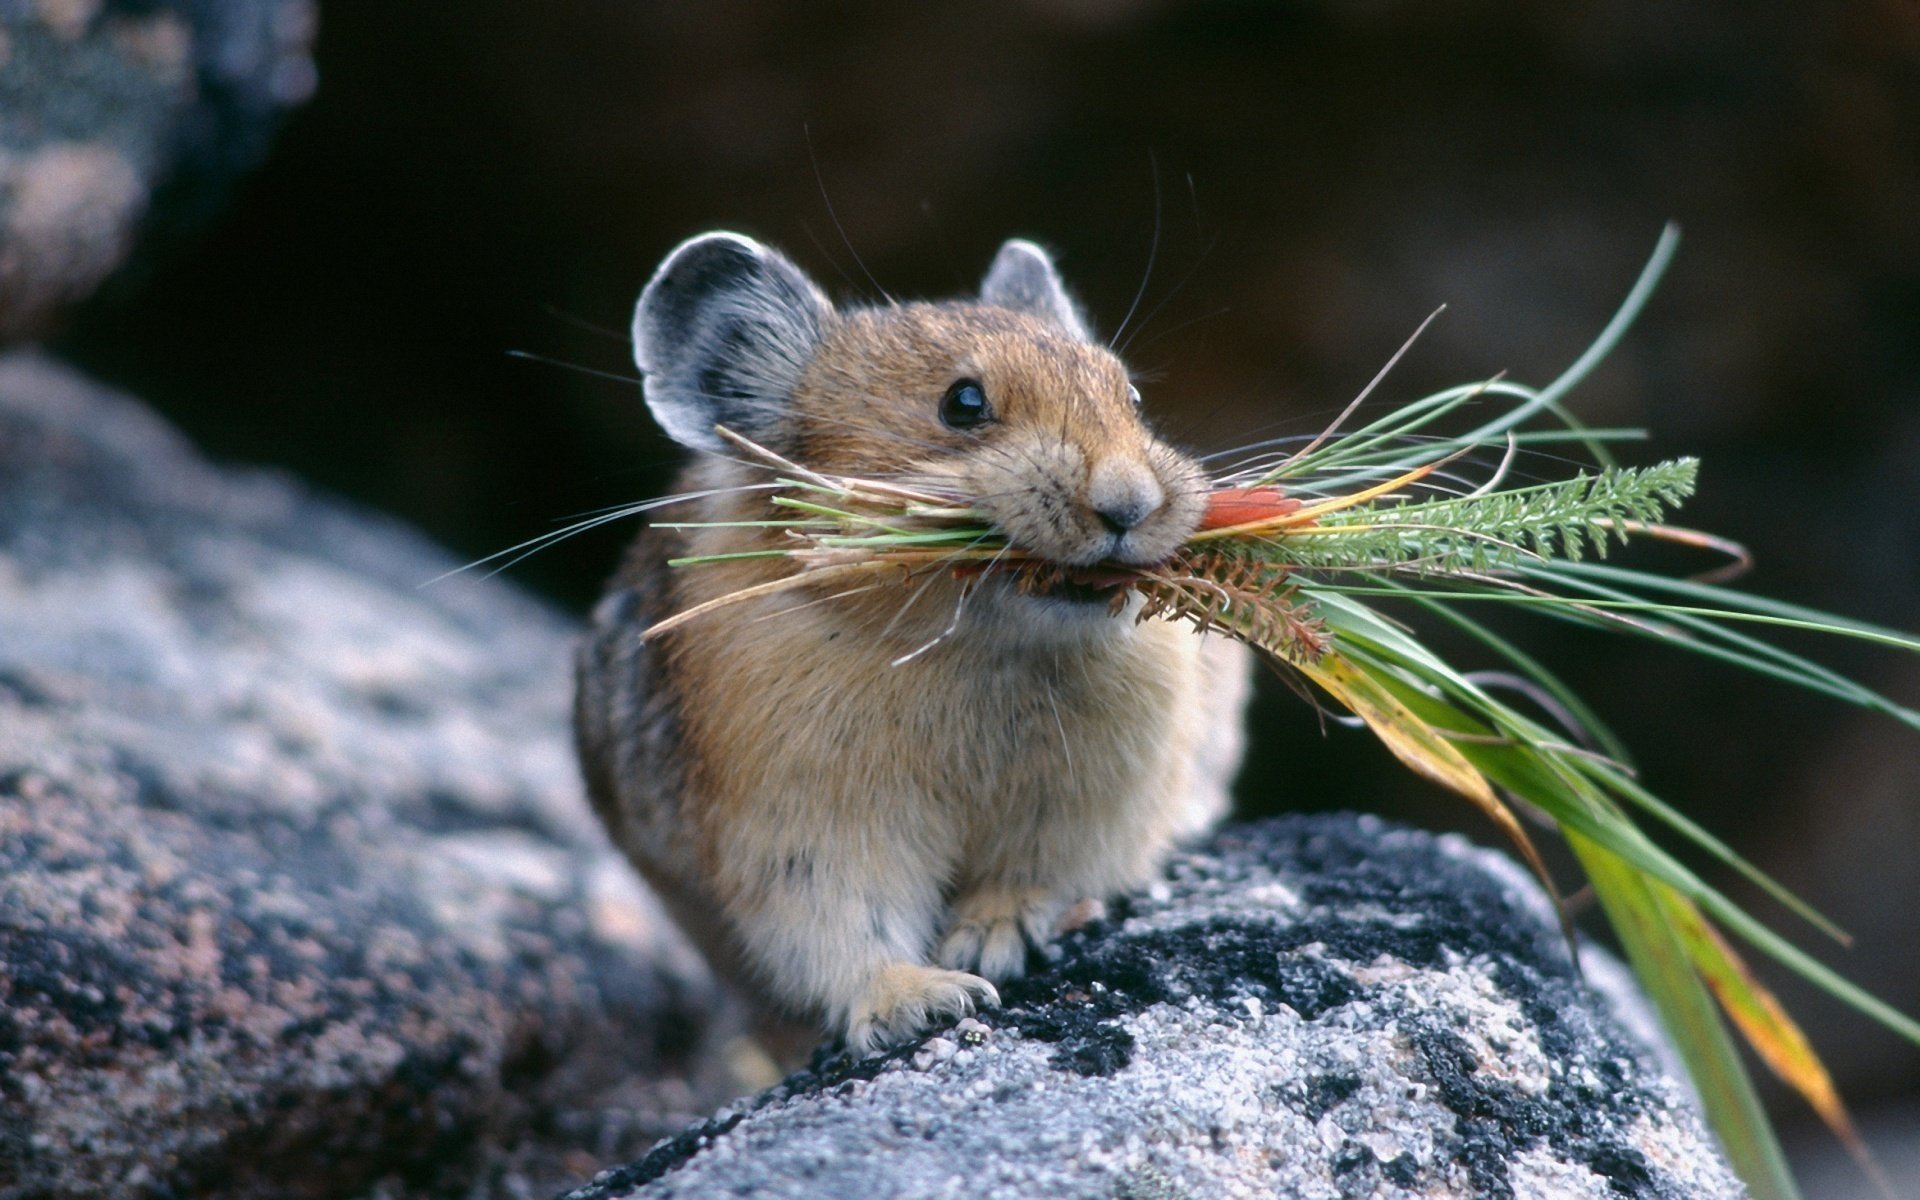 The rodent mouse makes supplies for the winter